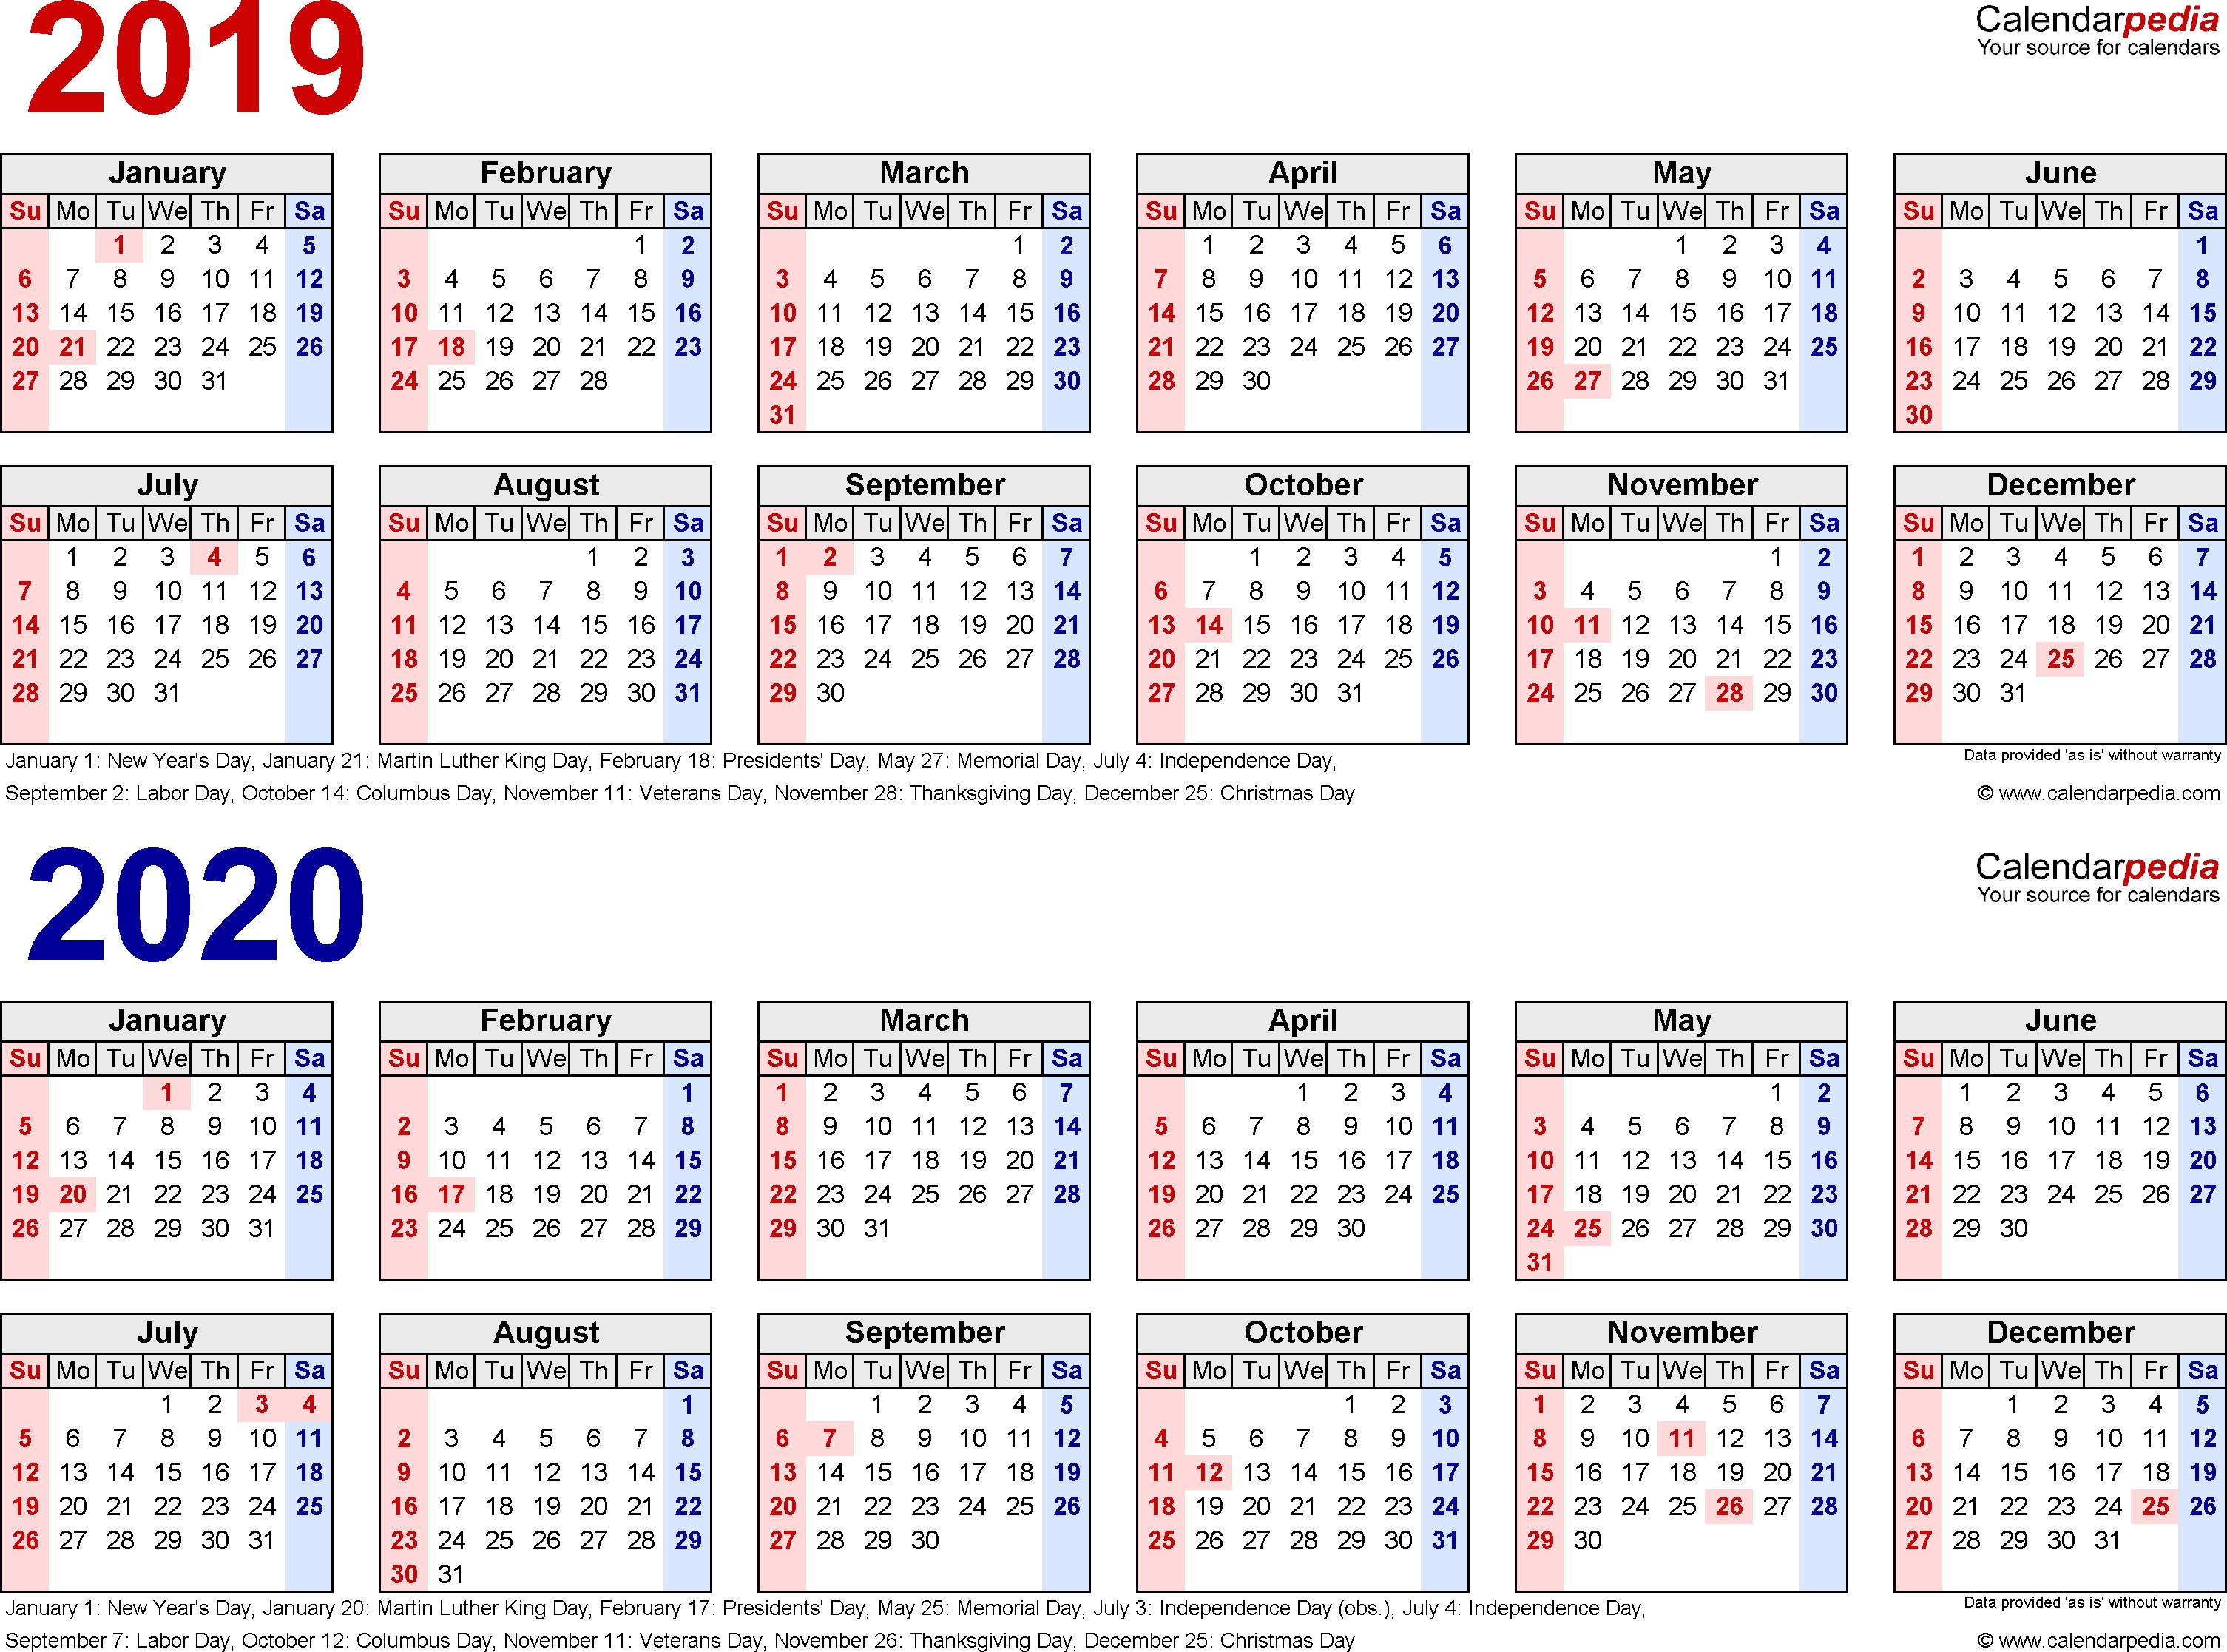 2019-2020 Calendar - Free Printable Two-Year Excel Calendars intended for Calendar For 2019 And 2020 To Edit